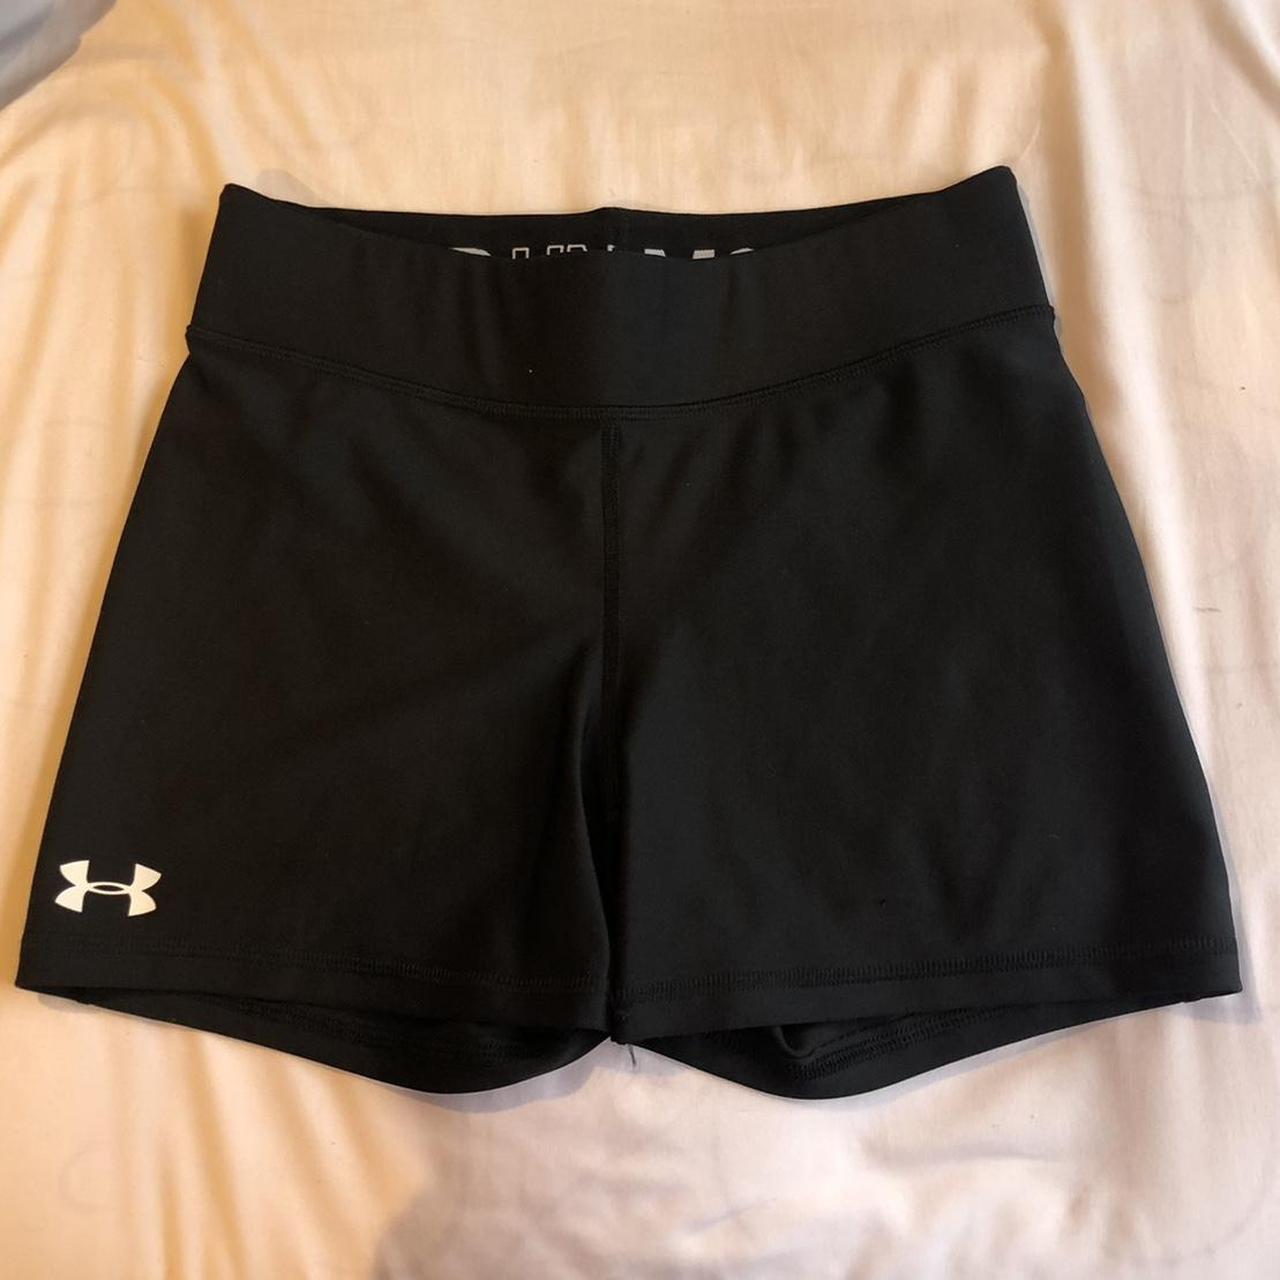 Hind Hydra Women's Athletic Running Shorts Lined - Depop